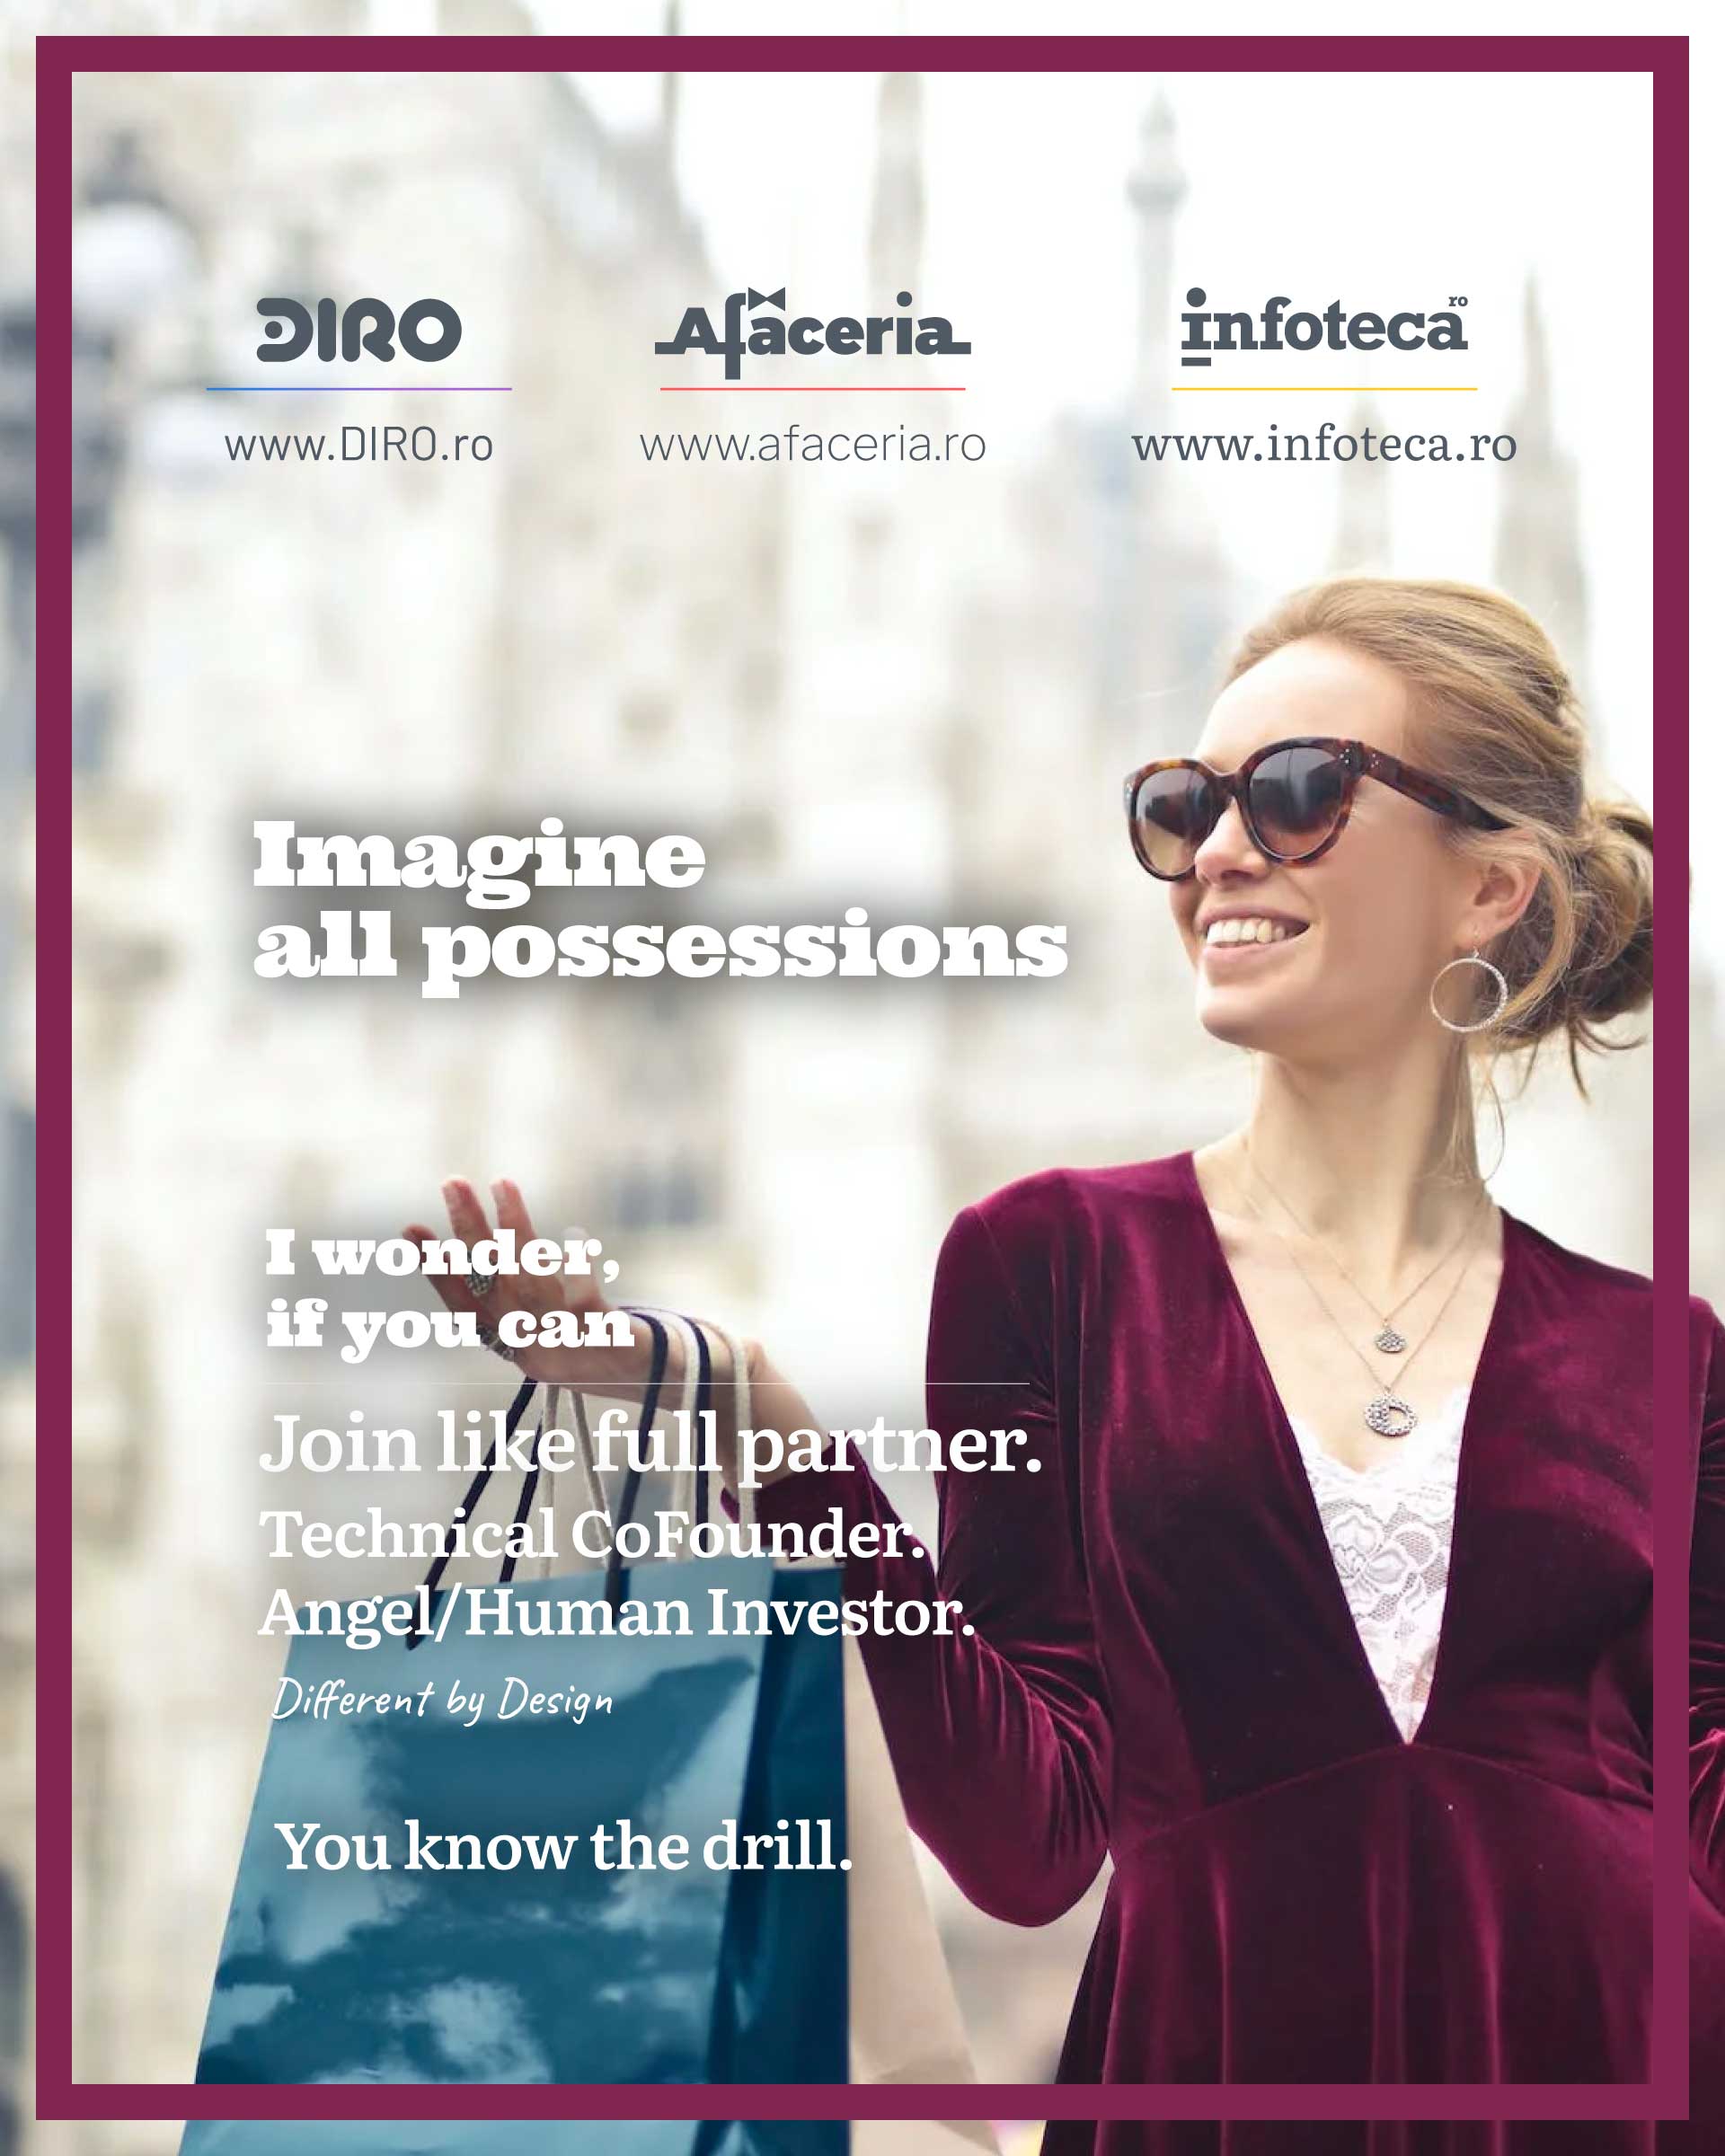 imagine all possessions by Afaceria, DIRO, Infoteca. Advertising campaign: Pitching for Partners. 